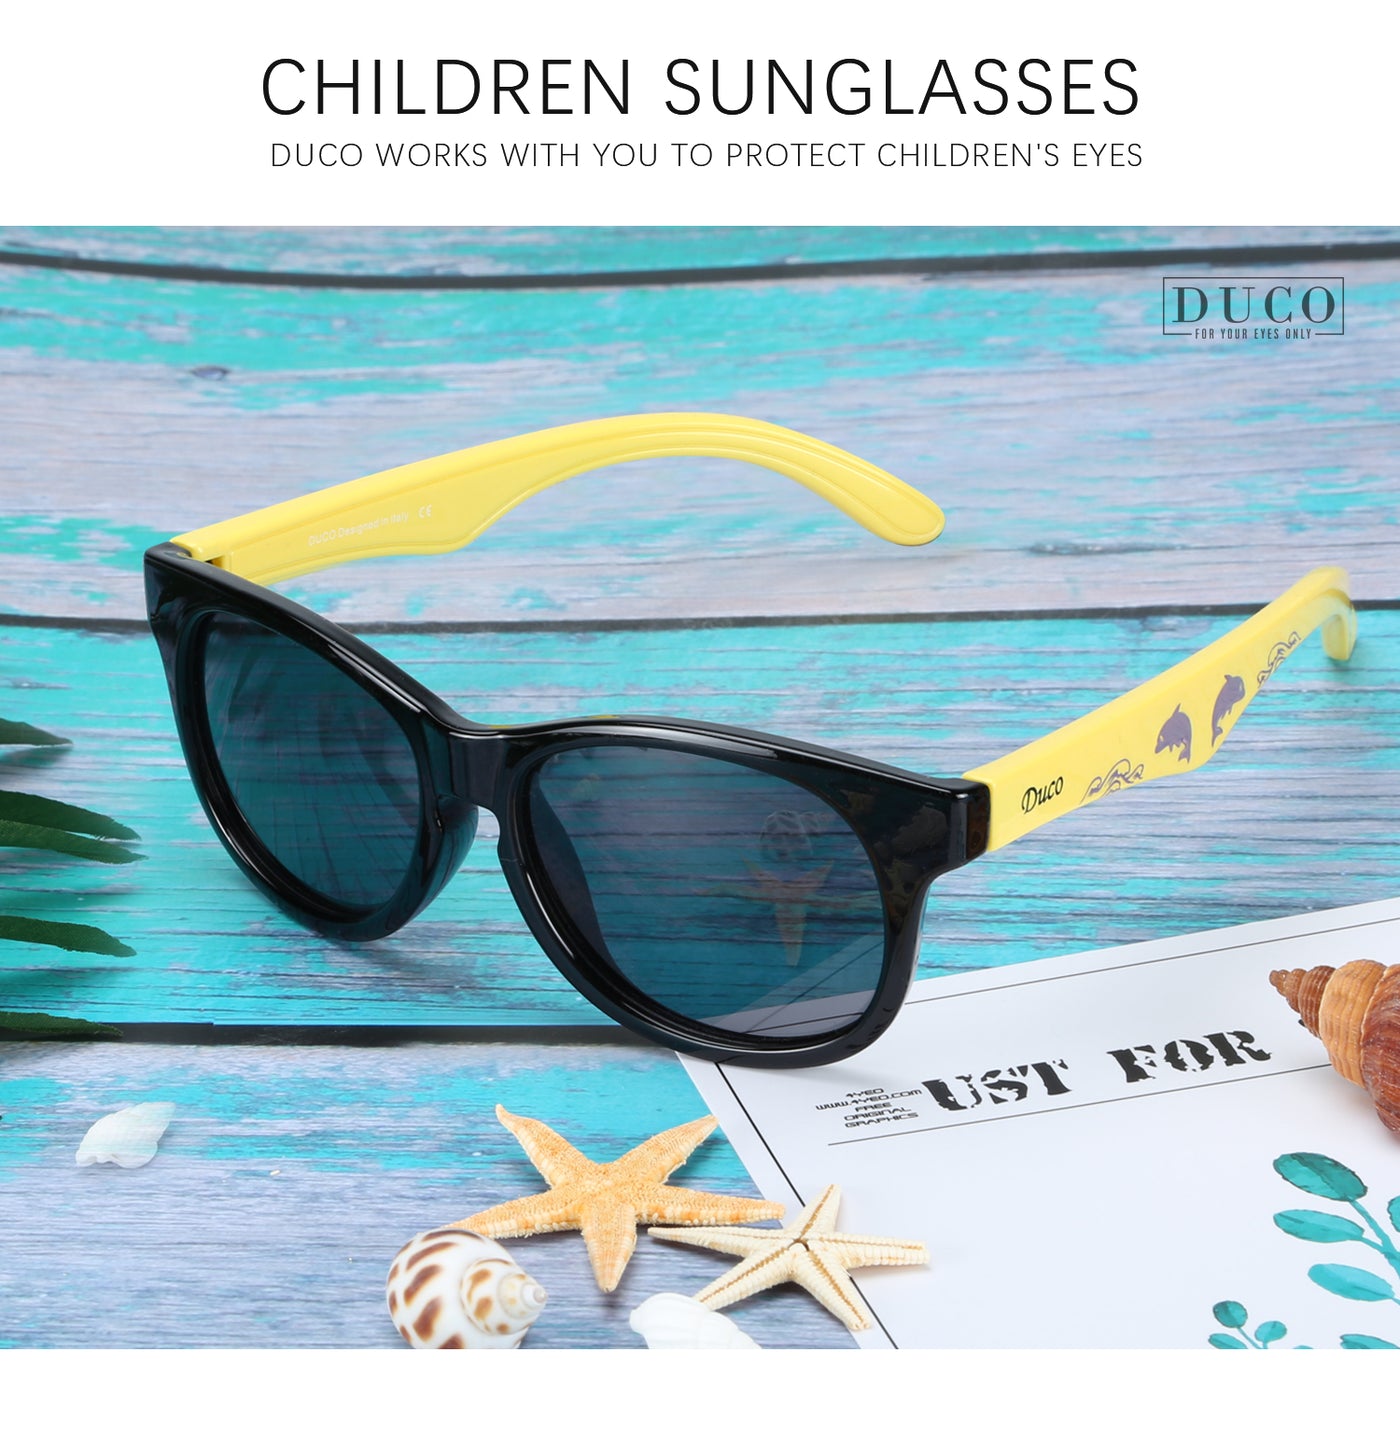 DUCO GLASSES-The right kind of shady DUCO TPEE Kids Sport Polarized Sunglasses For Kids Boys Girls Rubber Flexible Frame Sunglasses UV Protection Duco Sunglasses